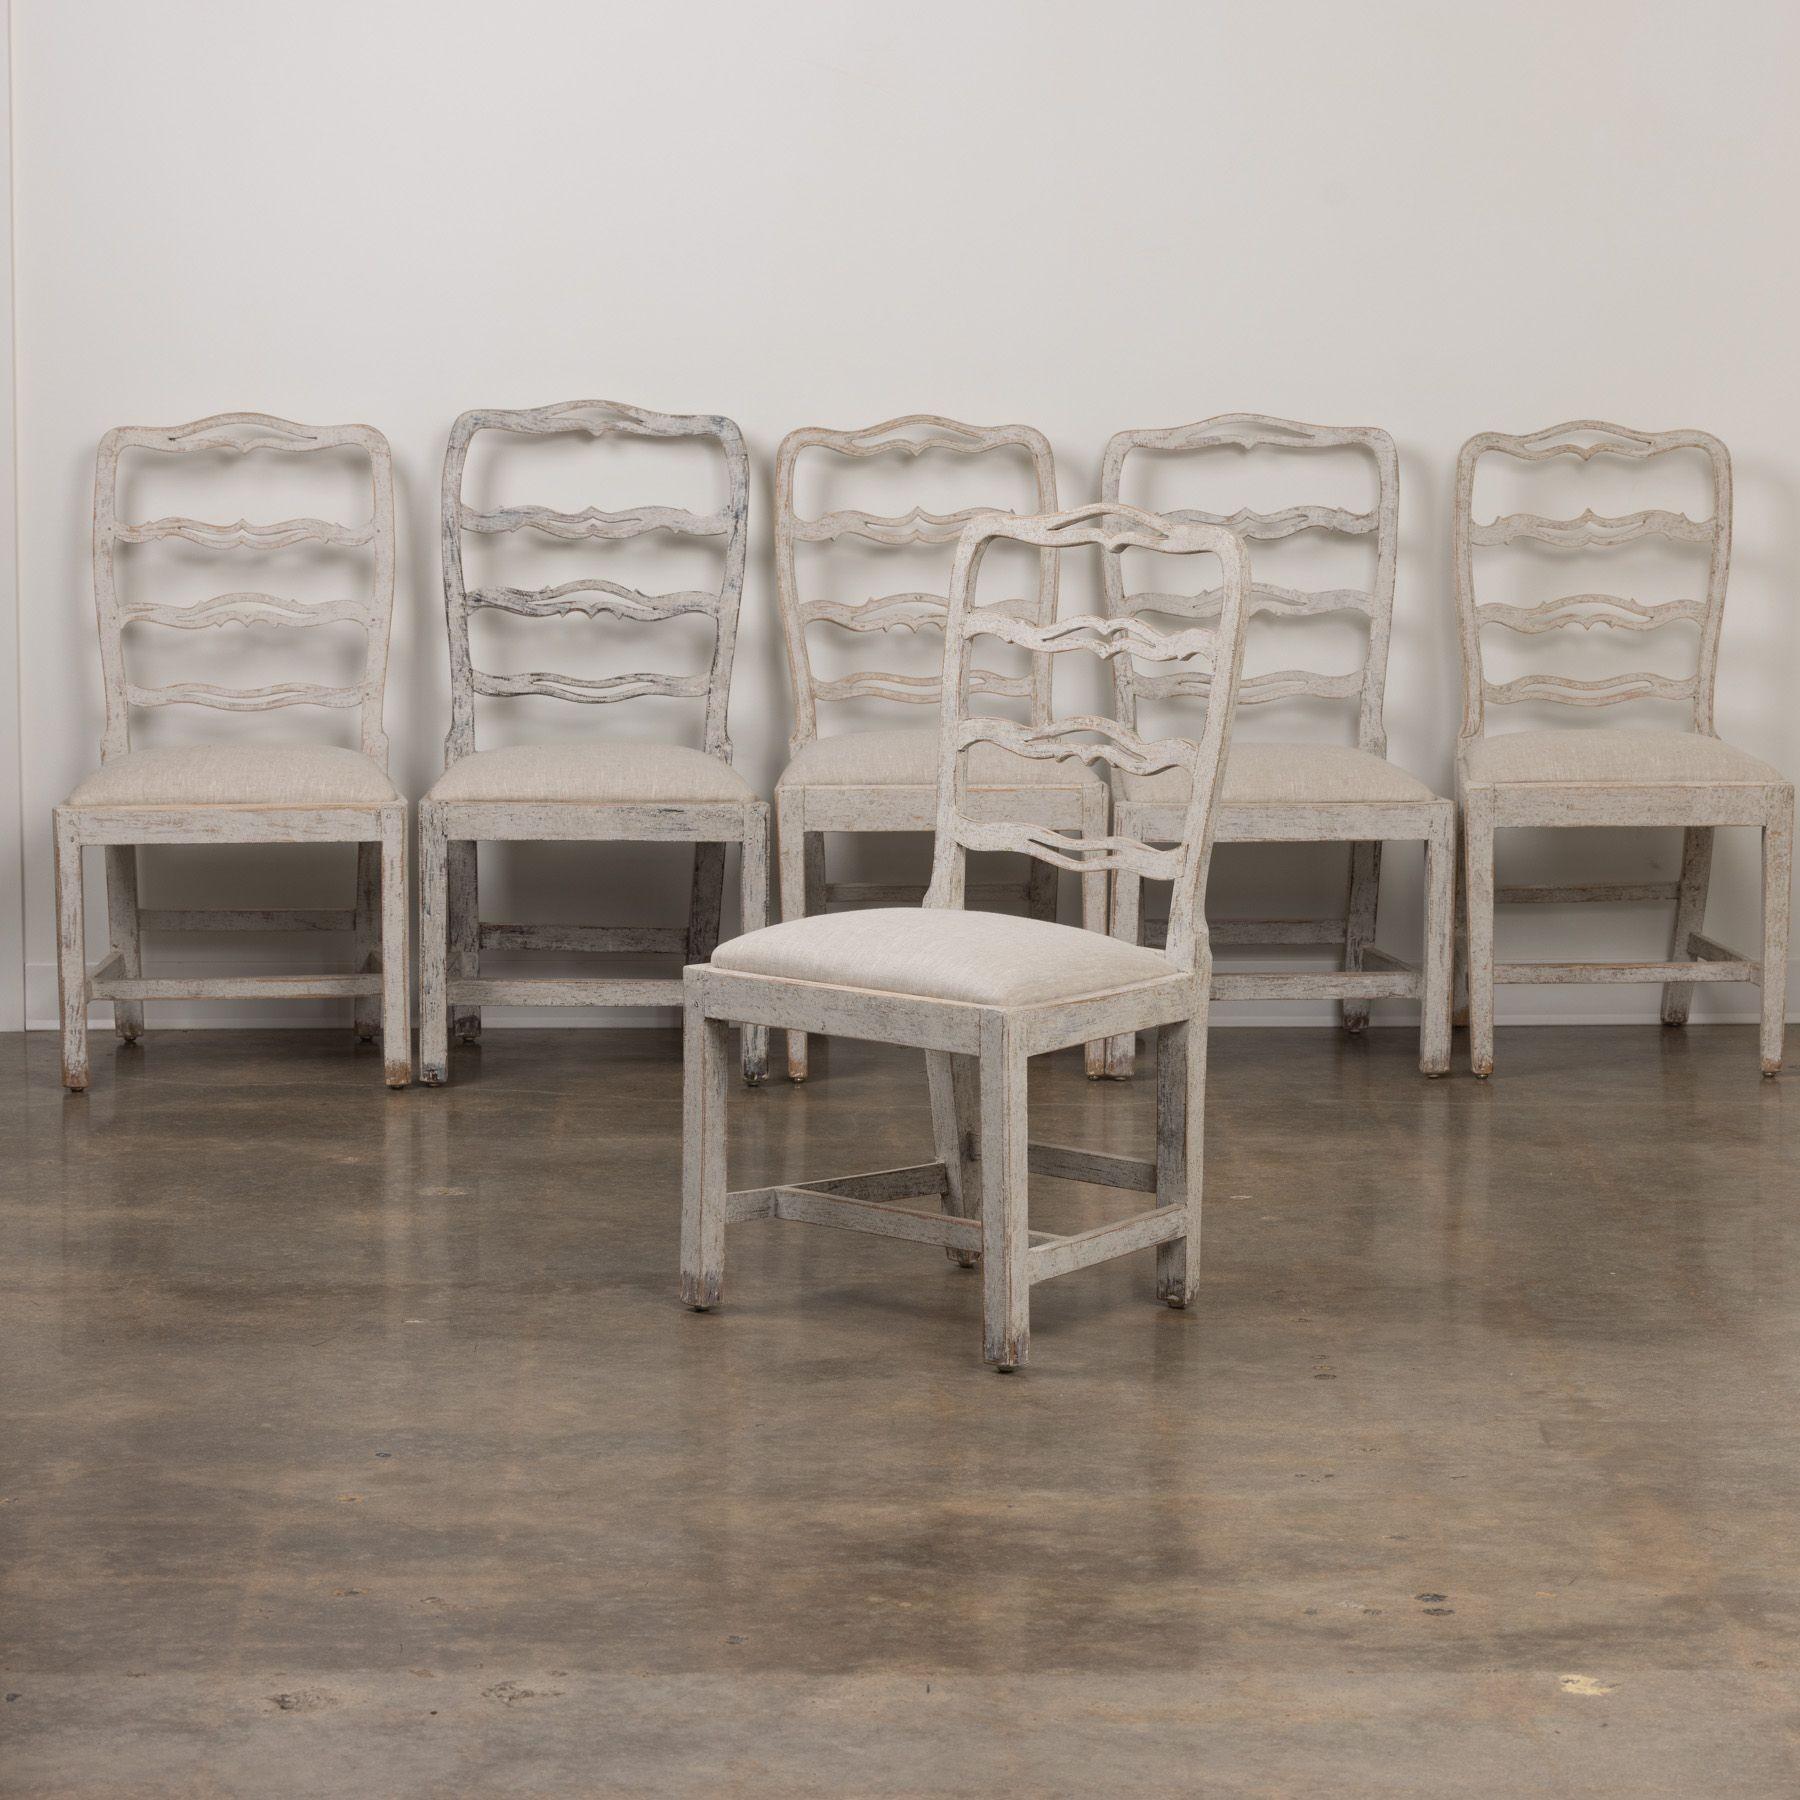 A matched set of 5 Swedish Gustavian period painted dining chairs from the 19th century, newly upholstered in linen with carved and pierced ladder backs and slip seats. This is an exquisite set of chairs.
The Gustavian style, named after King Gustav